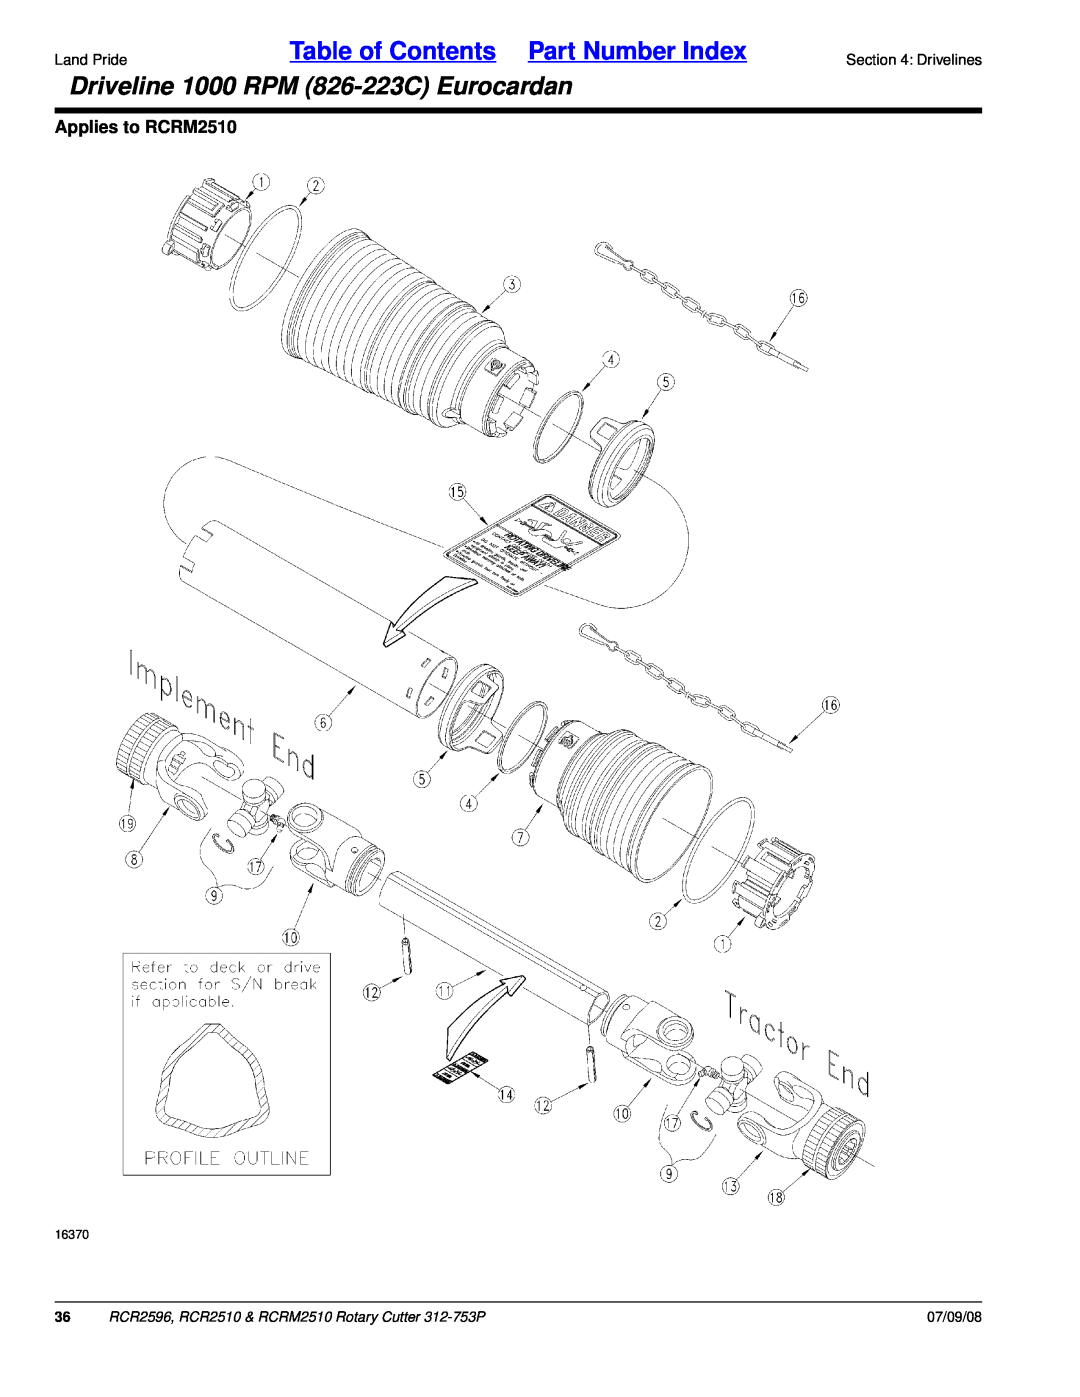 Land Pride RCR2596 manual Driveline 1000 RPM 826-223CEurocardan, Table of Contents Part Number Index, Applies to RCRM2510 